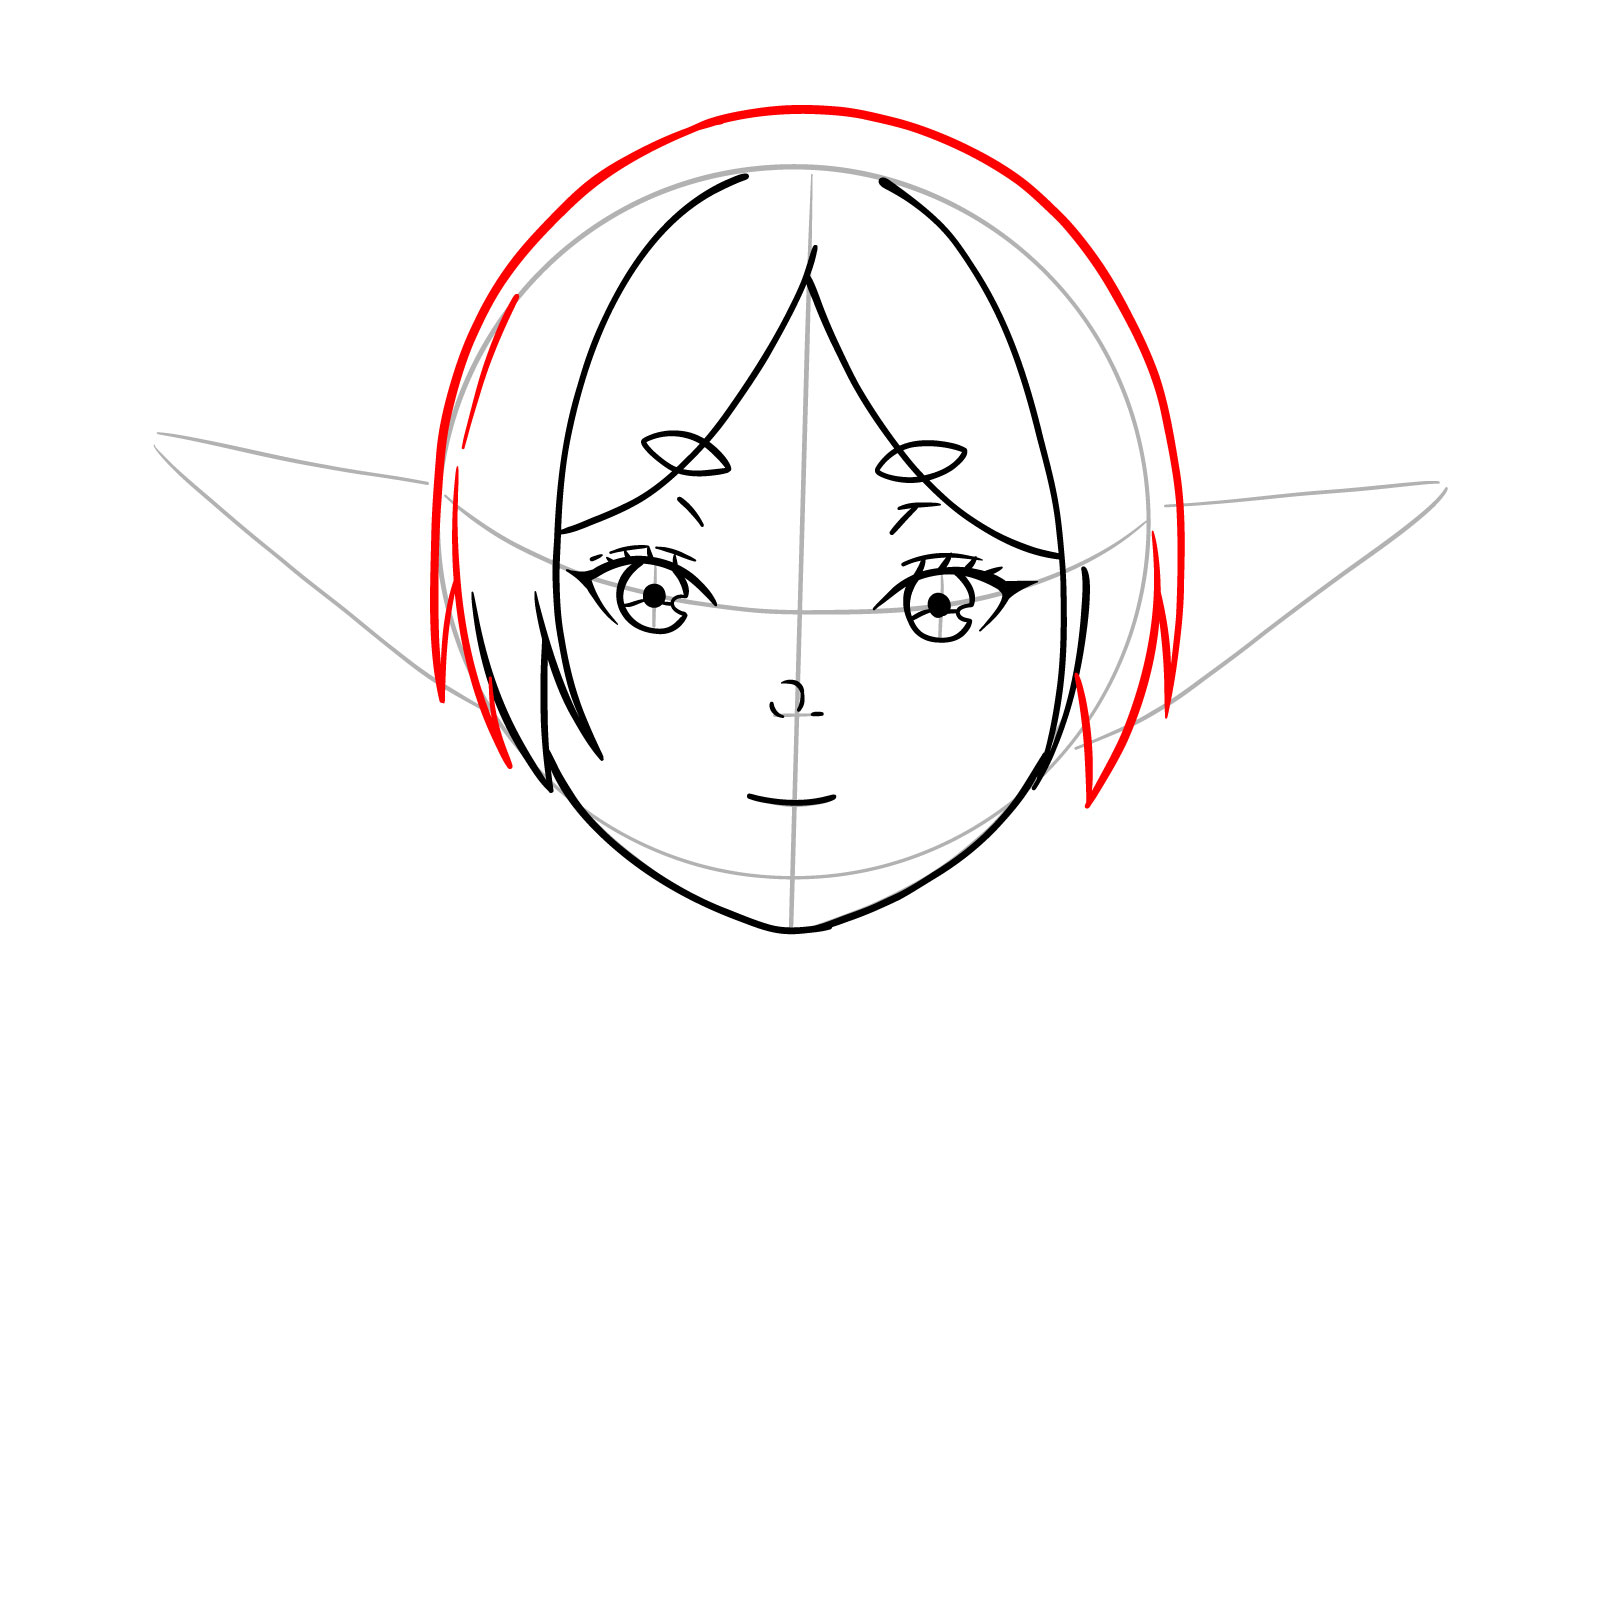 Hairline details added to complete Frieren's face sketch - step 08